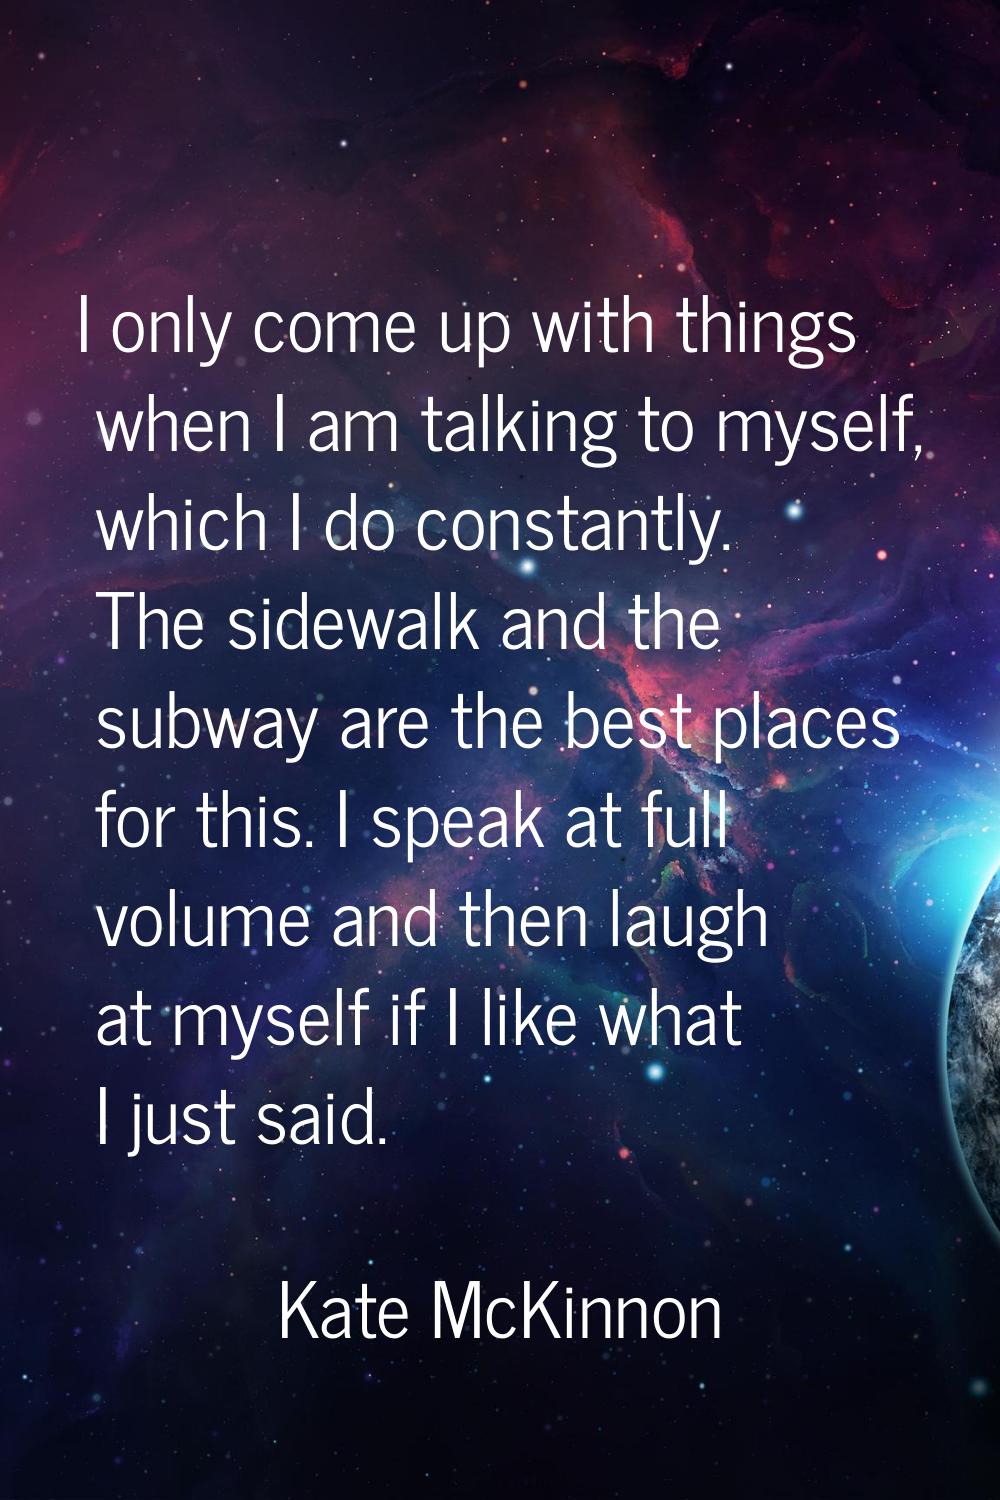 I only come up with things when I am talking to myself, which I do constantly. The sidewalk and the